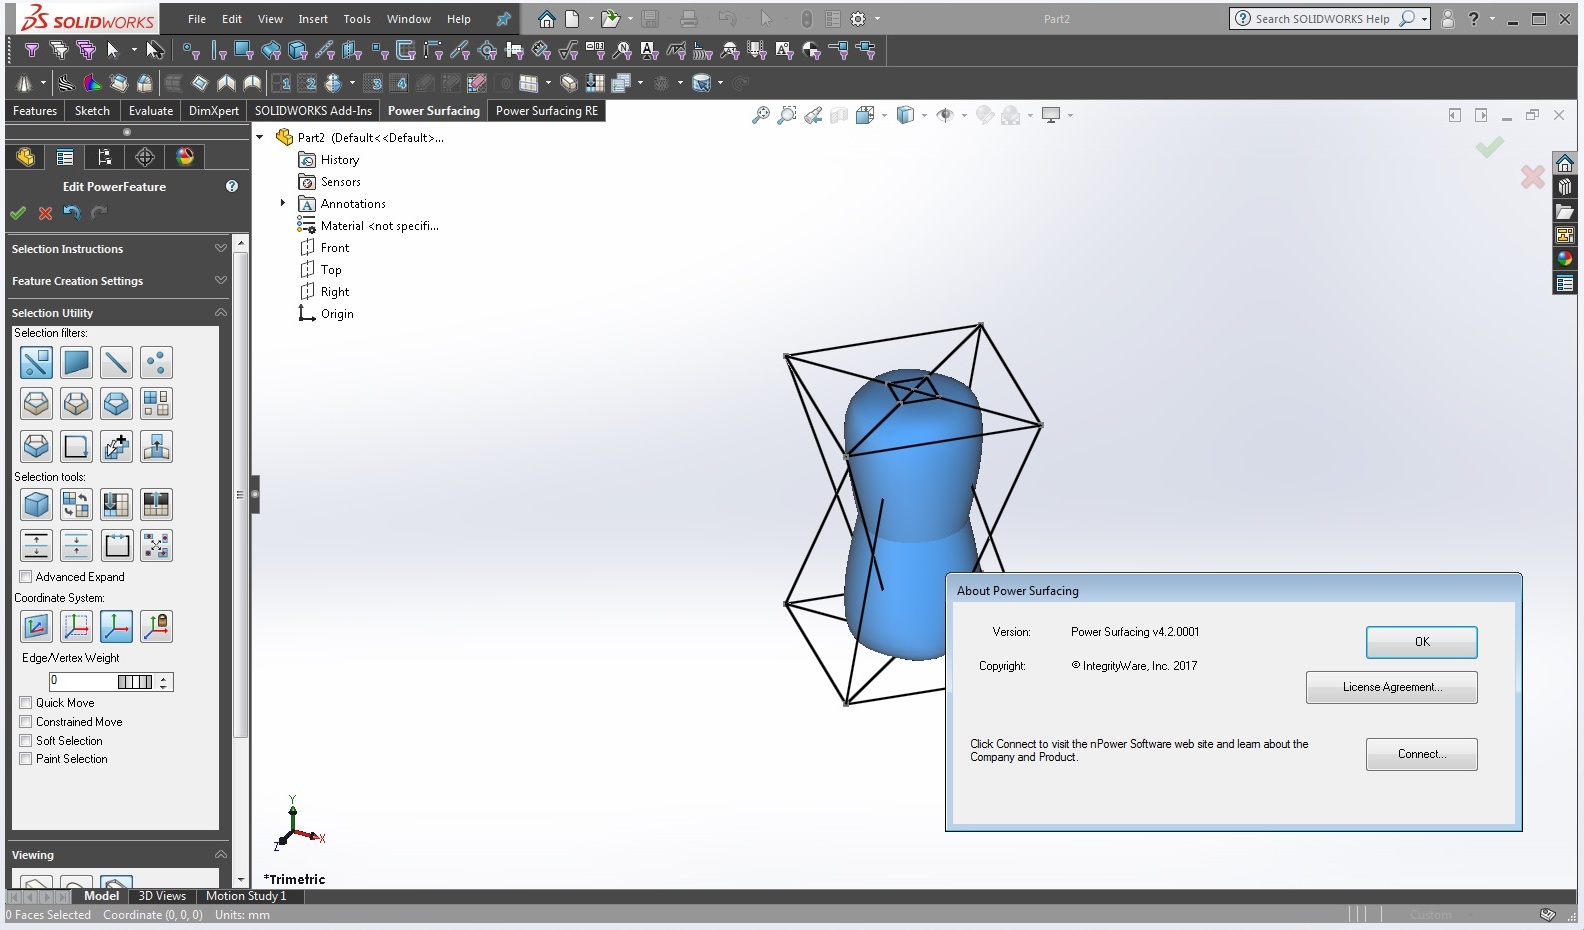 Design with PowerSurfacing RE v2.4-4.2 for SolidWorks 2012-2018 64bit